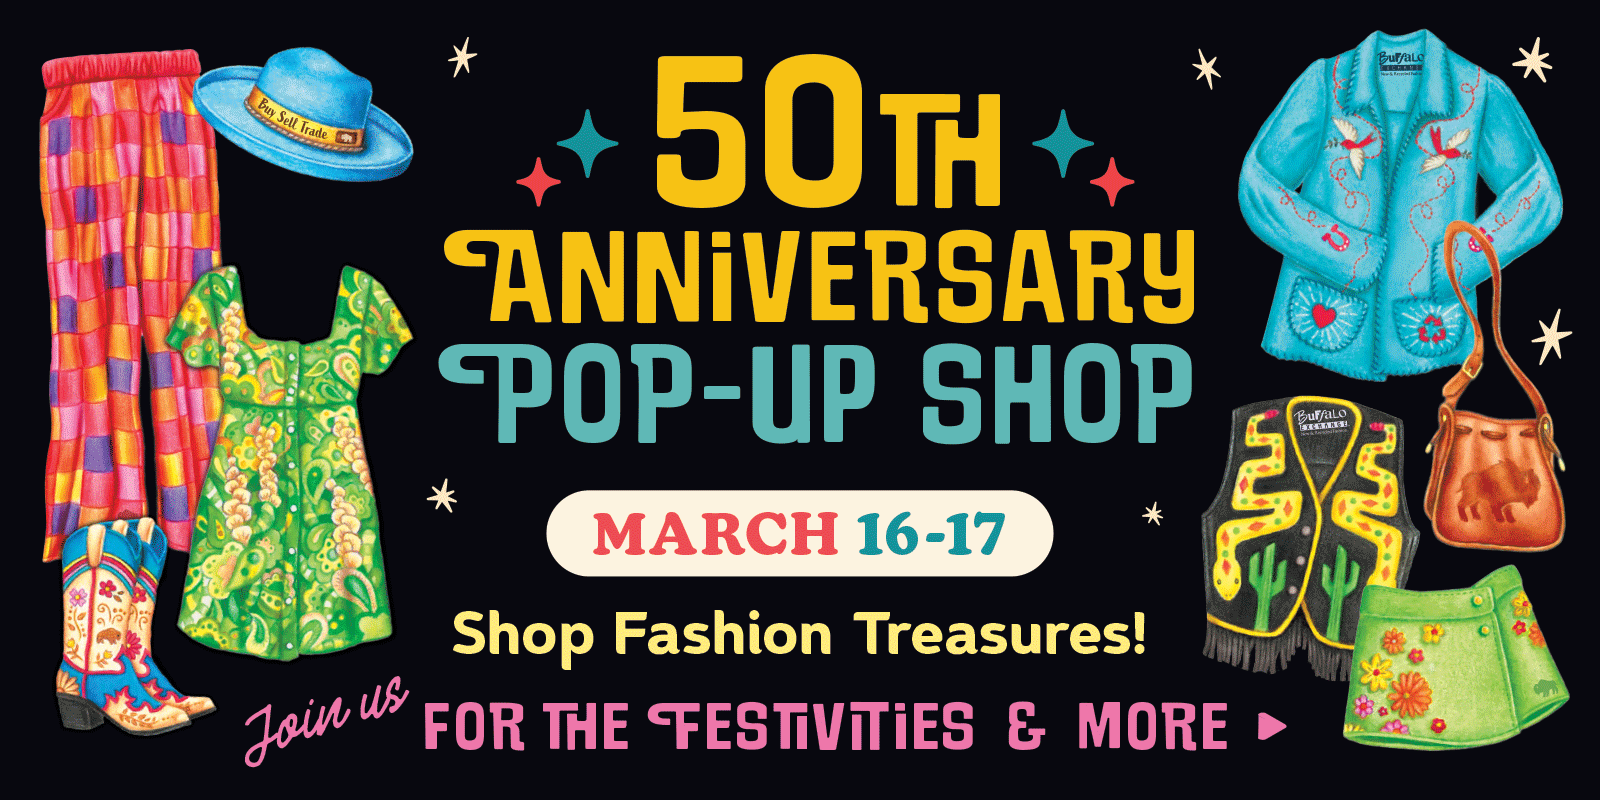 50th Anniversary Pop-up Shop | March 16-17 | Shop Fashion Treasures! Join us for the festivities & more! [various illustrated clothing and accessories]